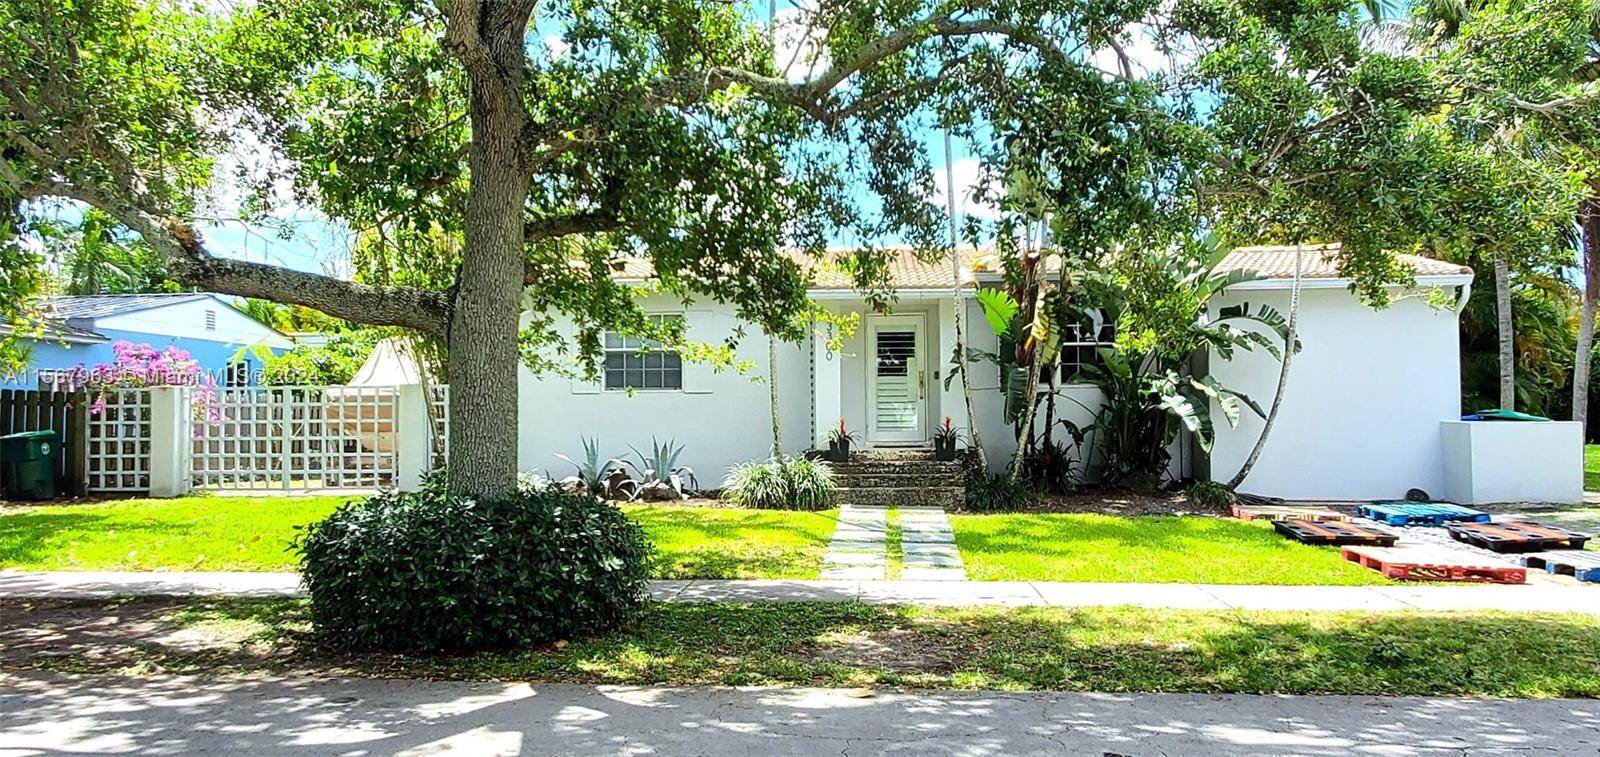 Beautiful and cozy house in one of the most desirable places to live in South Florida.